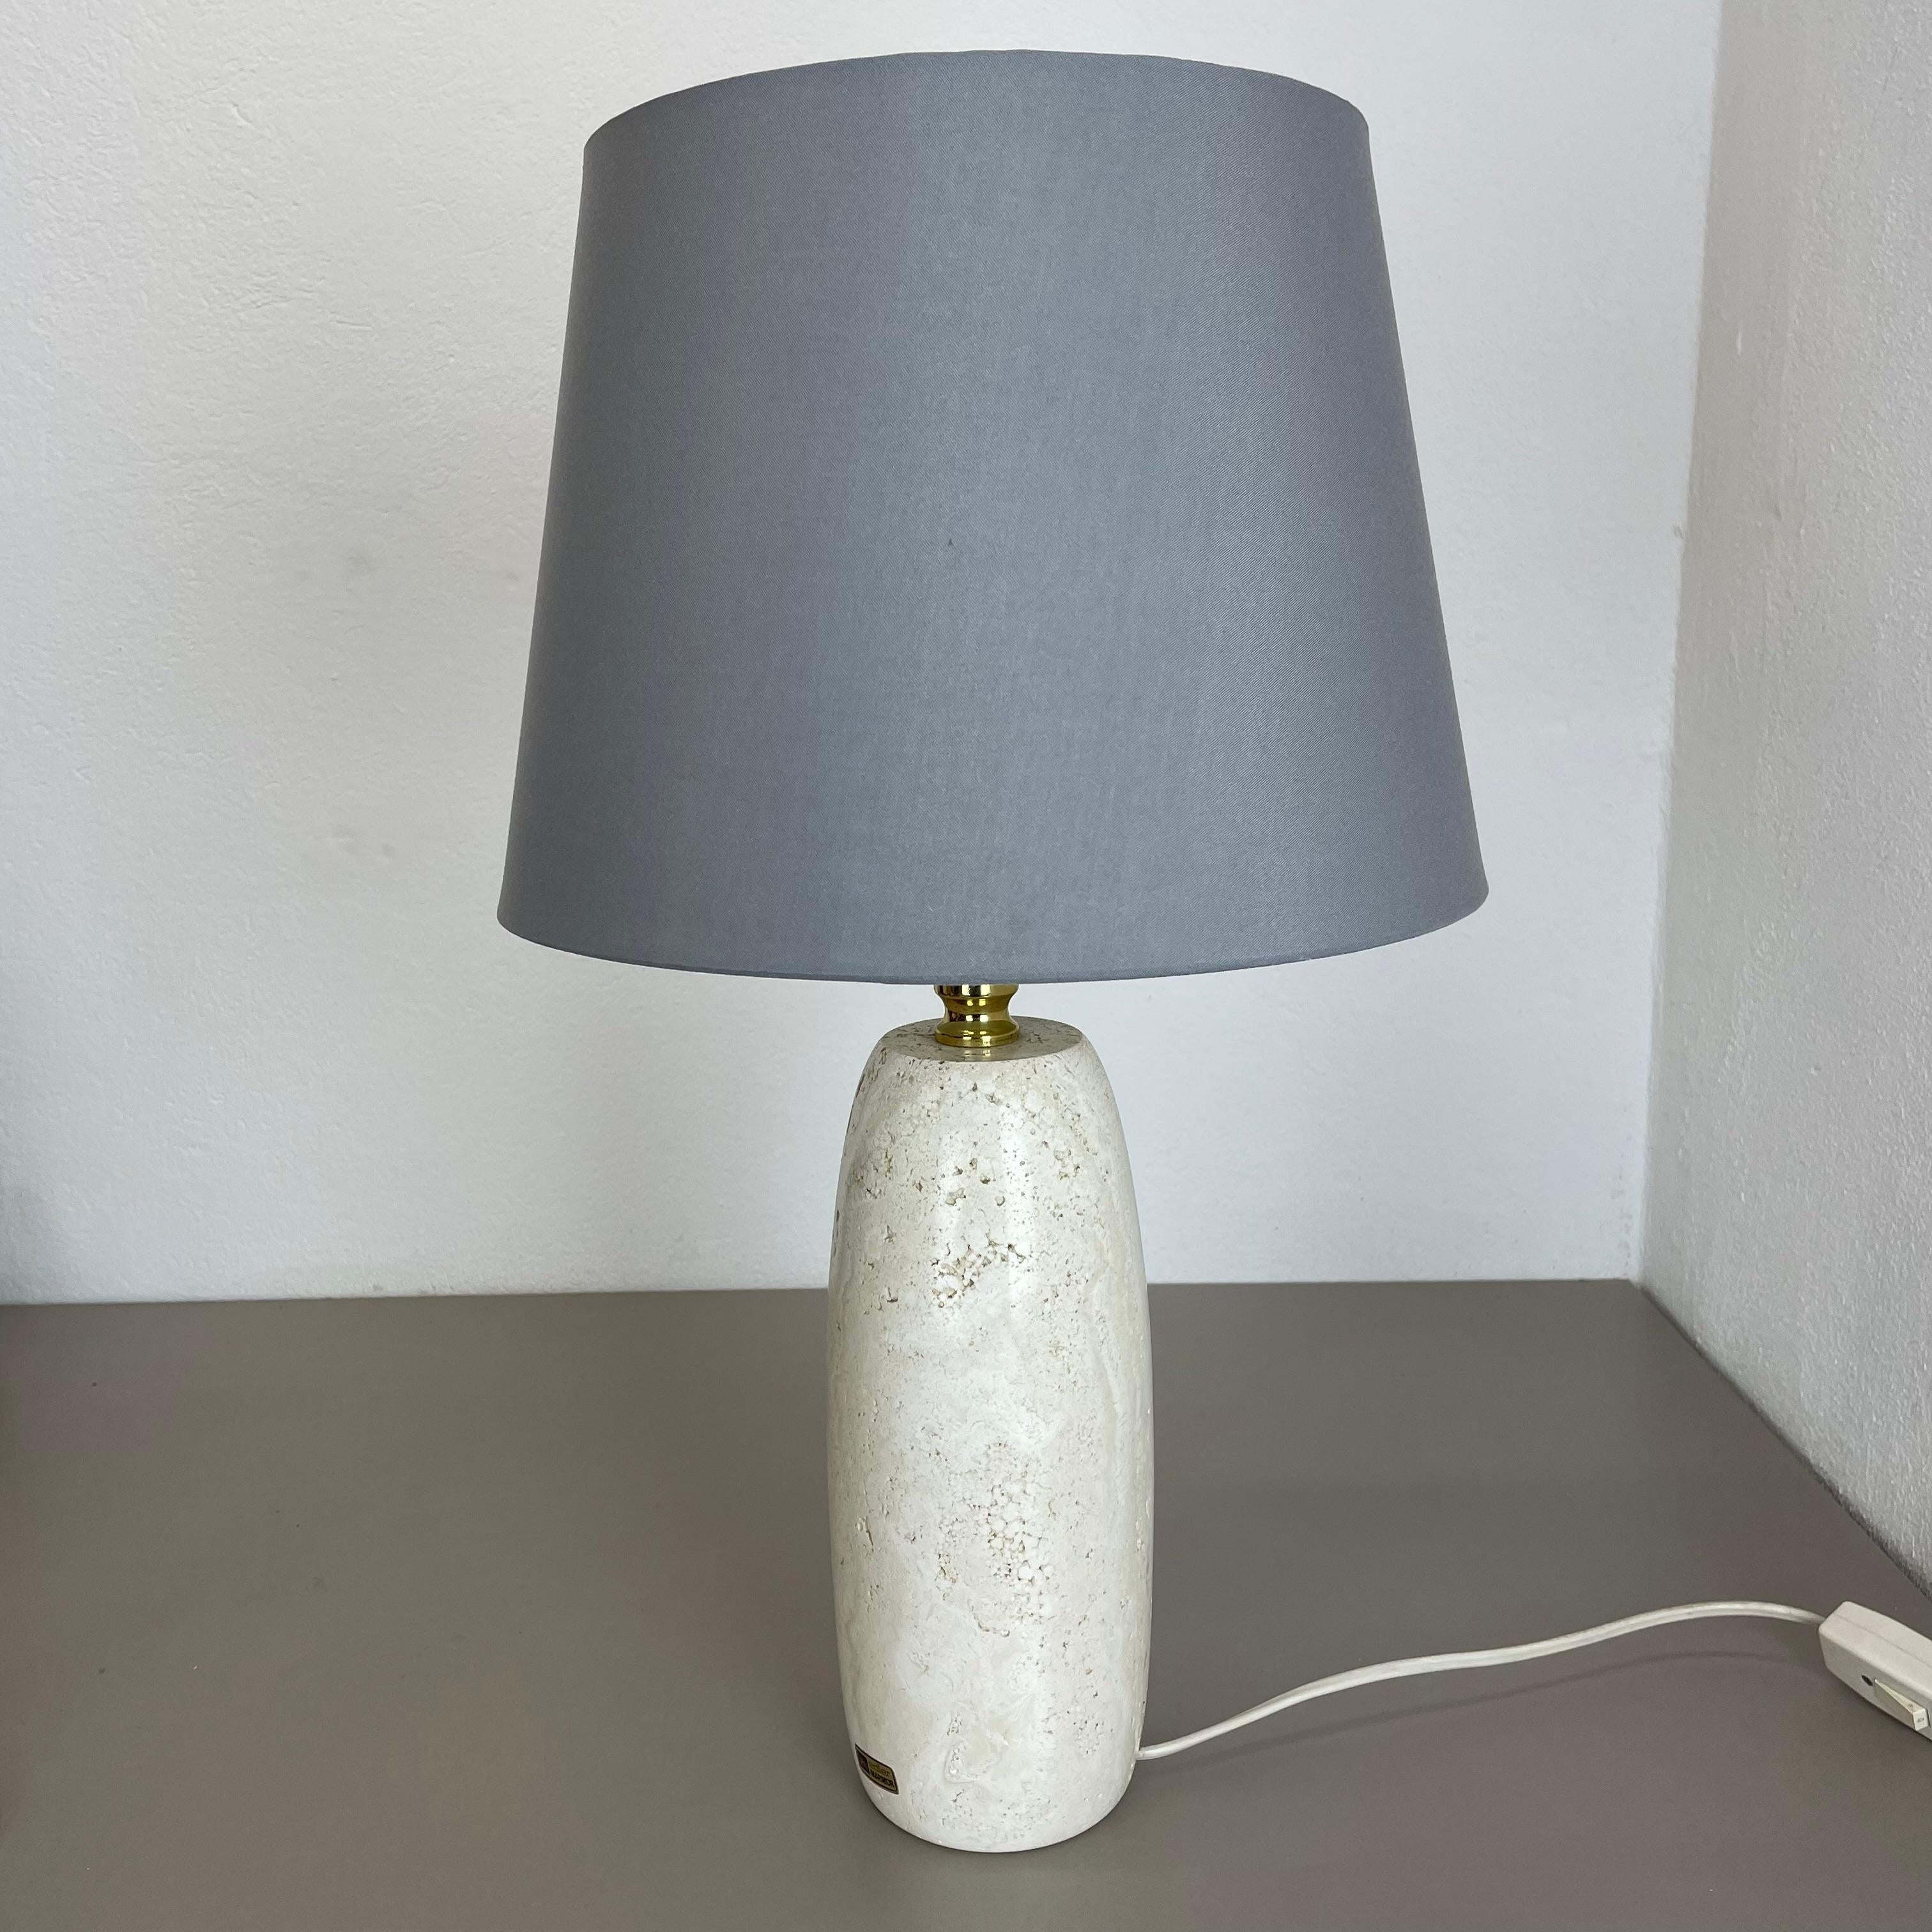 Article:

Impressive large travertine marble light base stand


Origin:

Italy (was sold on the germany market)


Decade:

1970s



Description:

This original vintage light base element is made of high quality travertine marble in a nice organic